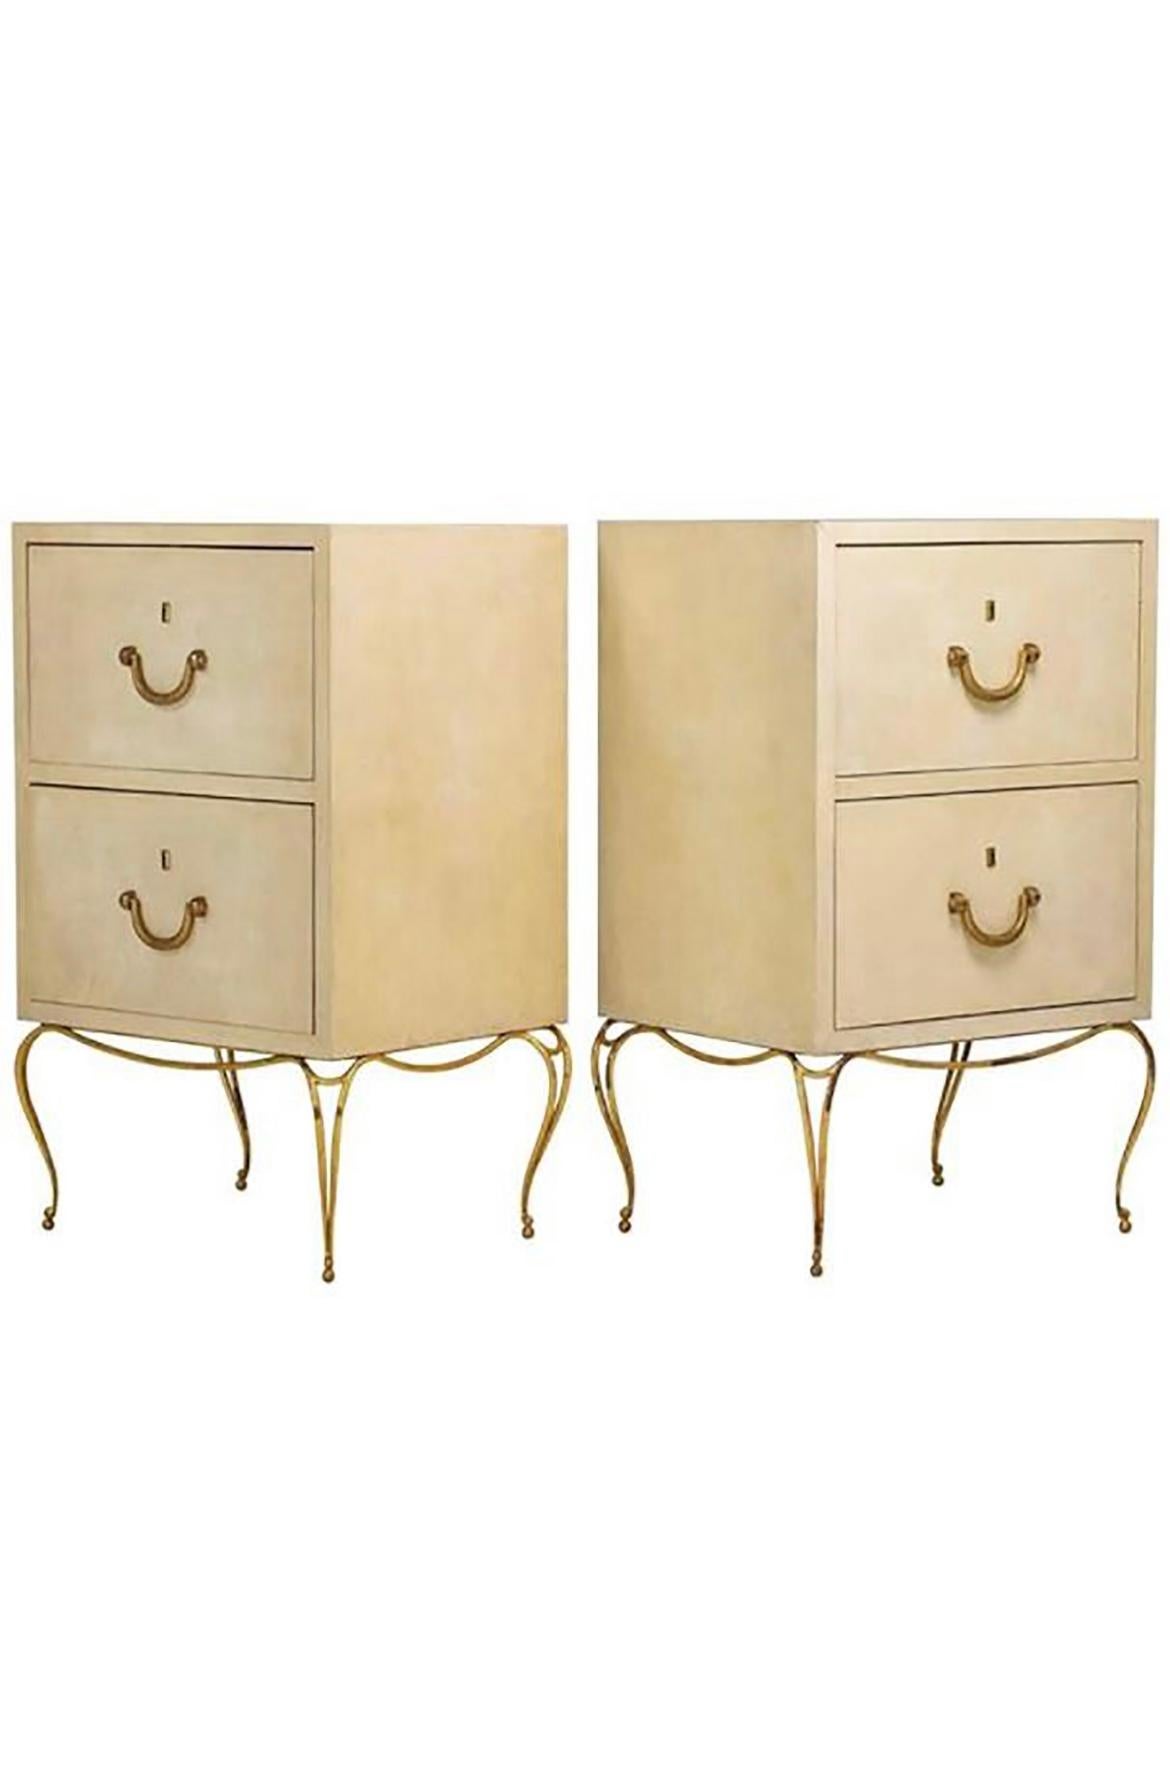 Pair Large Midcentury French Parchment Commodes, Chests or Cabinets, 1950s For Sale 13